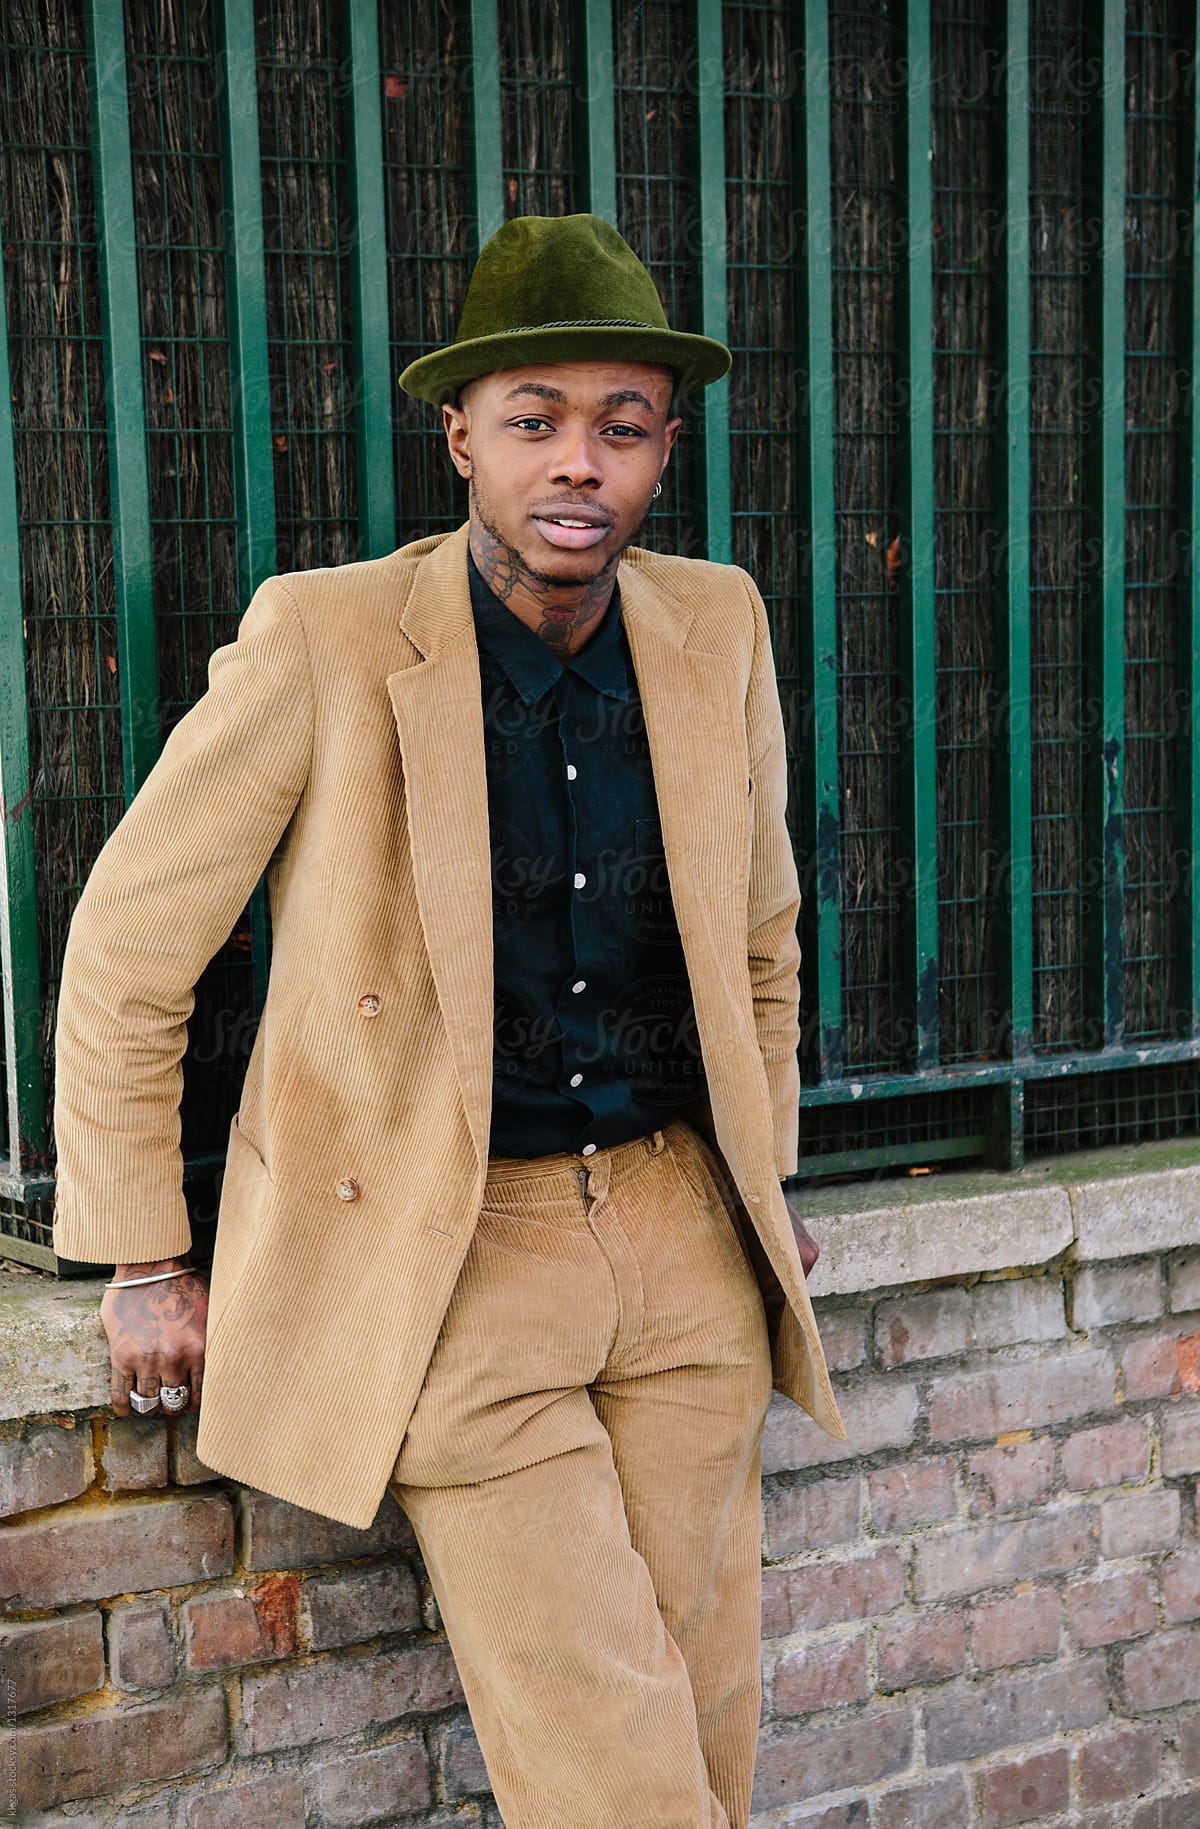 Stylish young black man with tattoos and hat